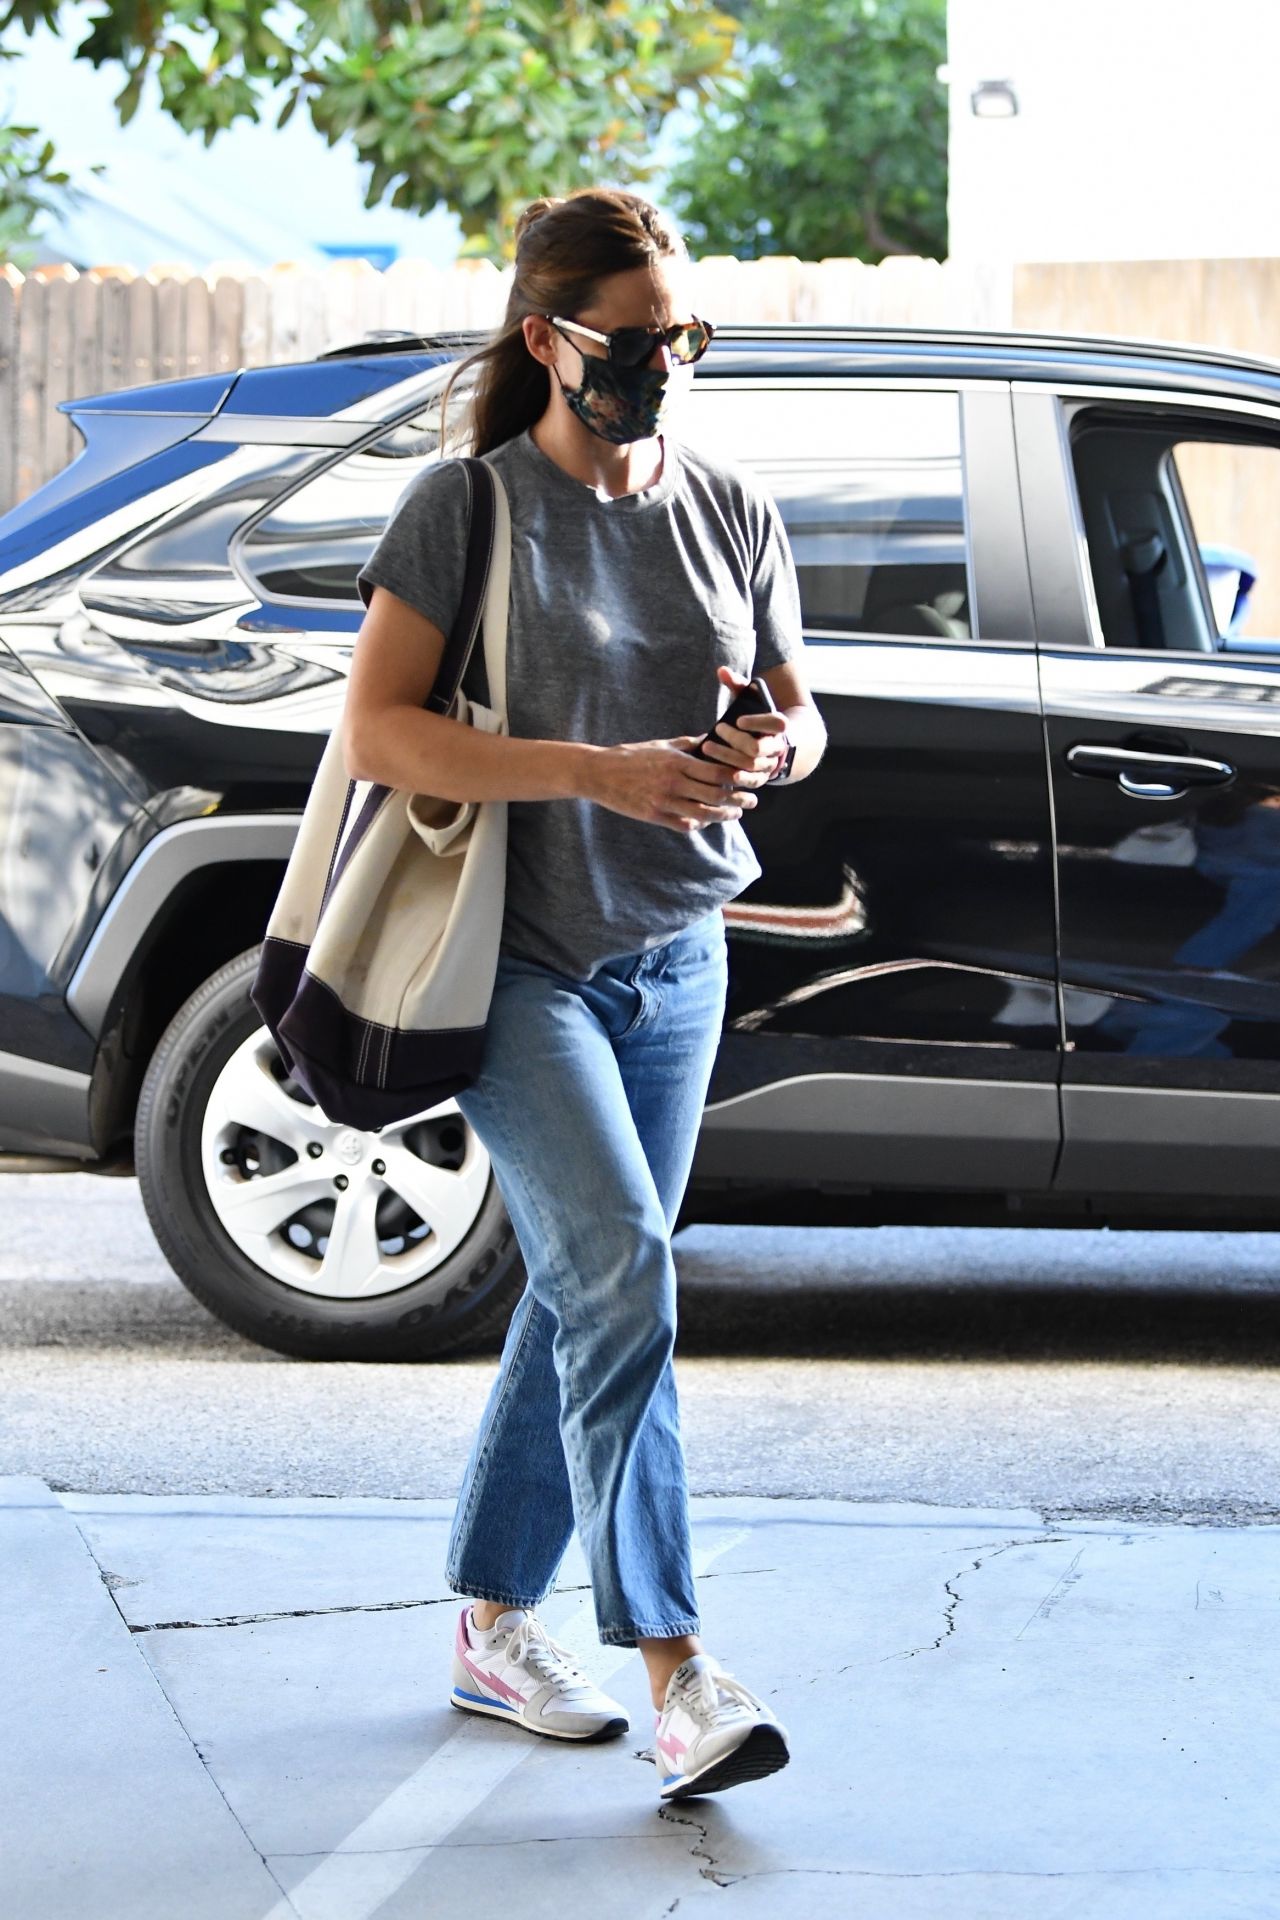 jennifer-garner-in-casual-outfit-visits-a-spa-in-brentwood-08-31-2020-1.jpg